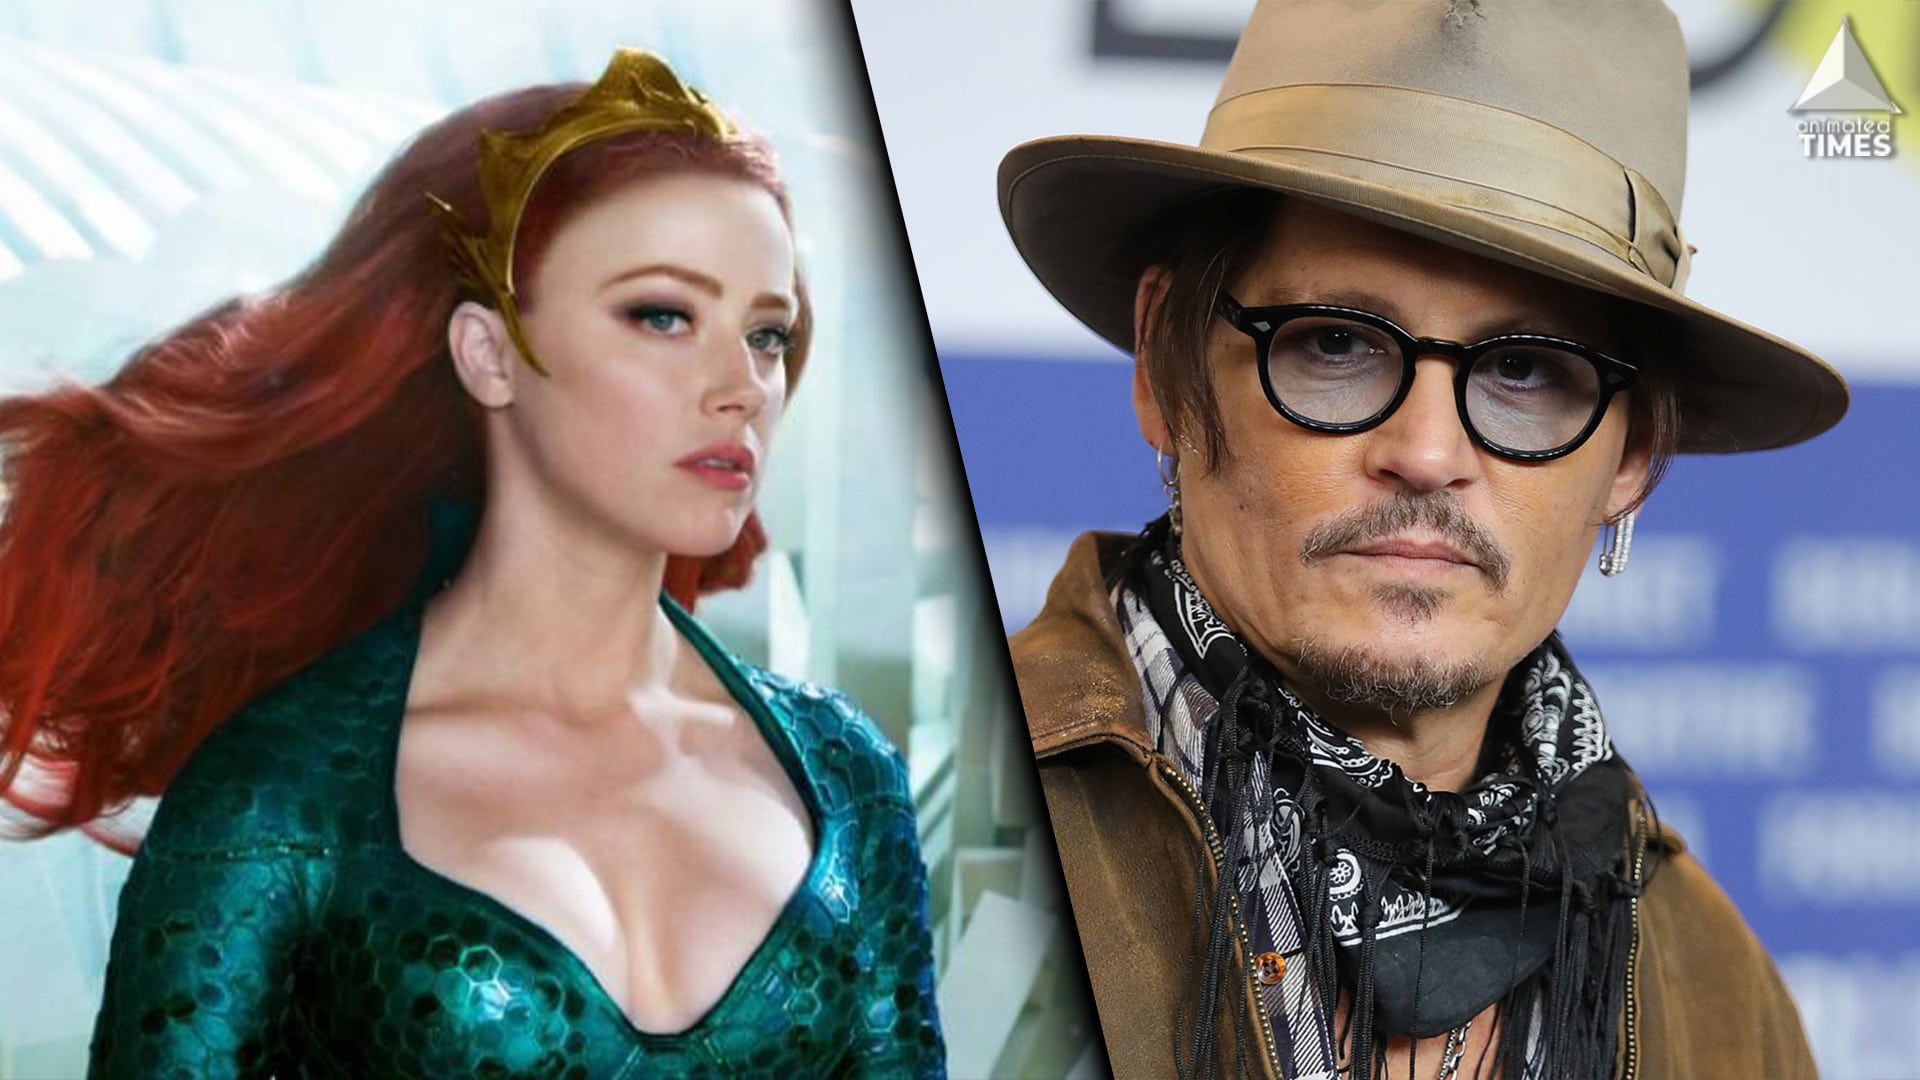 Petition To Remove Amber Heard From Aquaman 2 Reaches 1.5 Million Signatures